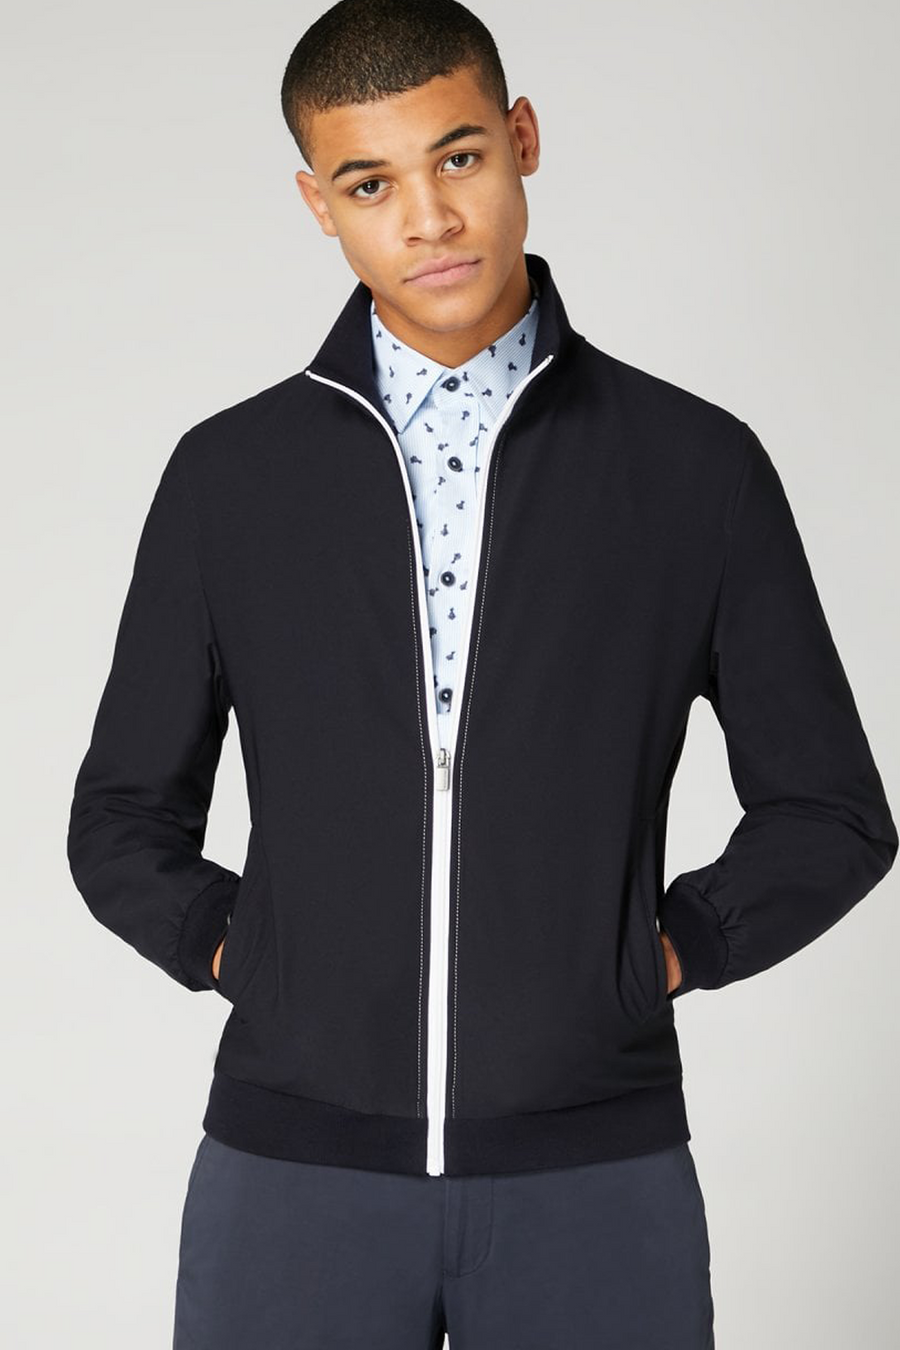 Buy the Remus Uomo Contrast Zip Casual Jacket Navy at Intro. Spend £50 for free UK delivery. Official stockists. We ship worldwide.